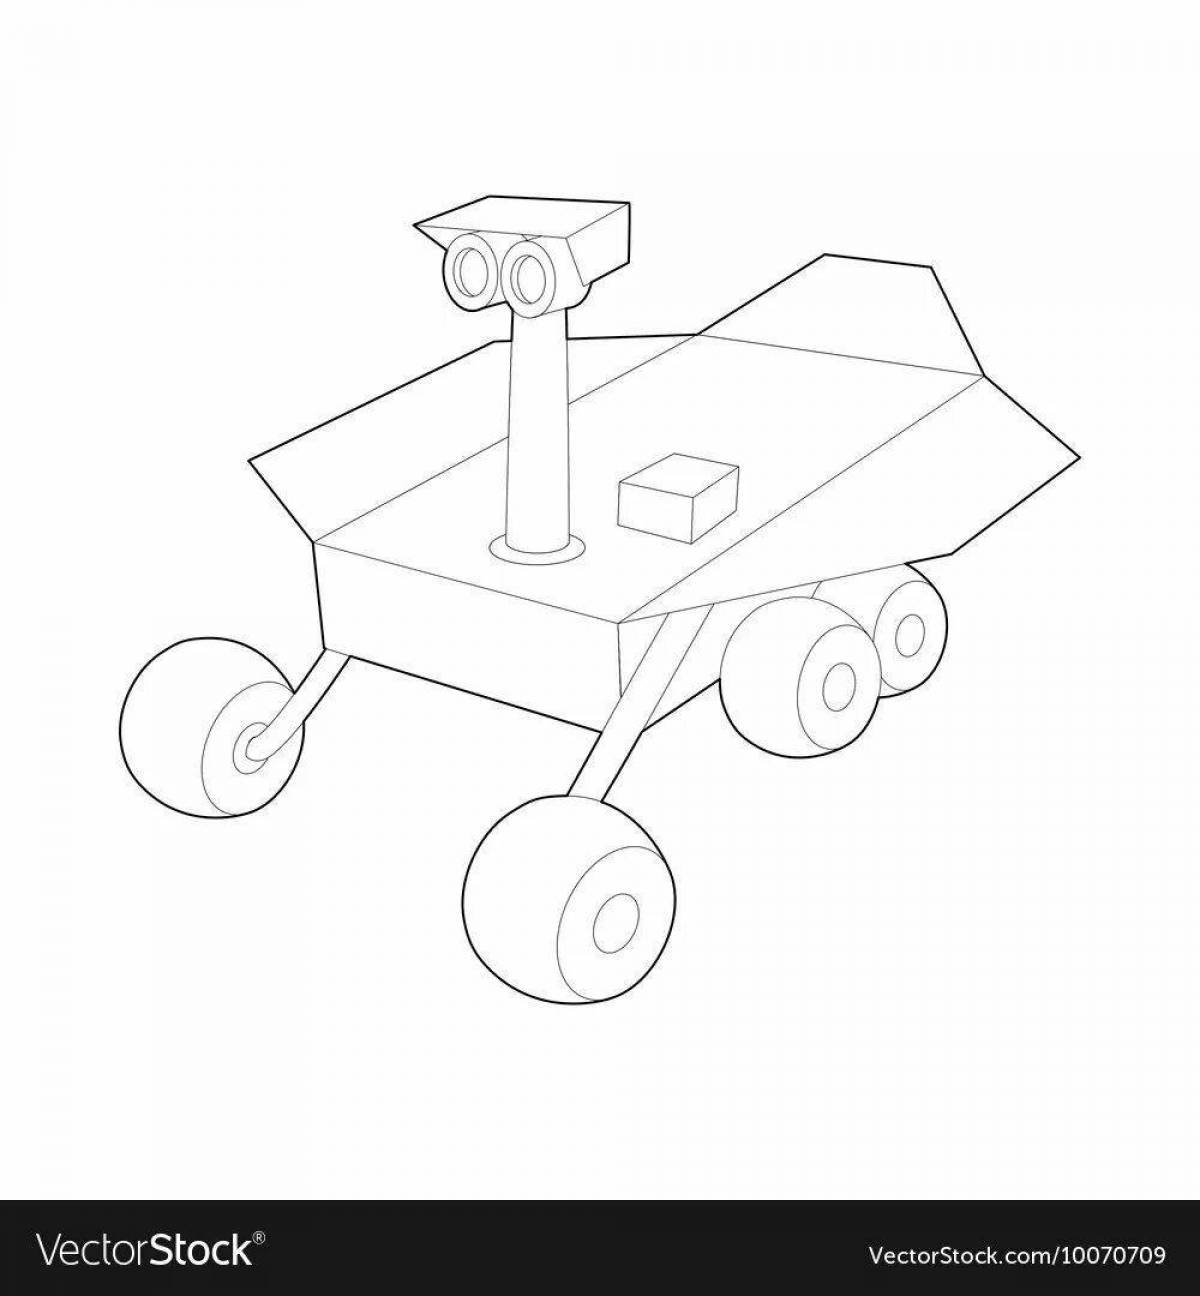 Playful page rover coloring book